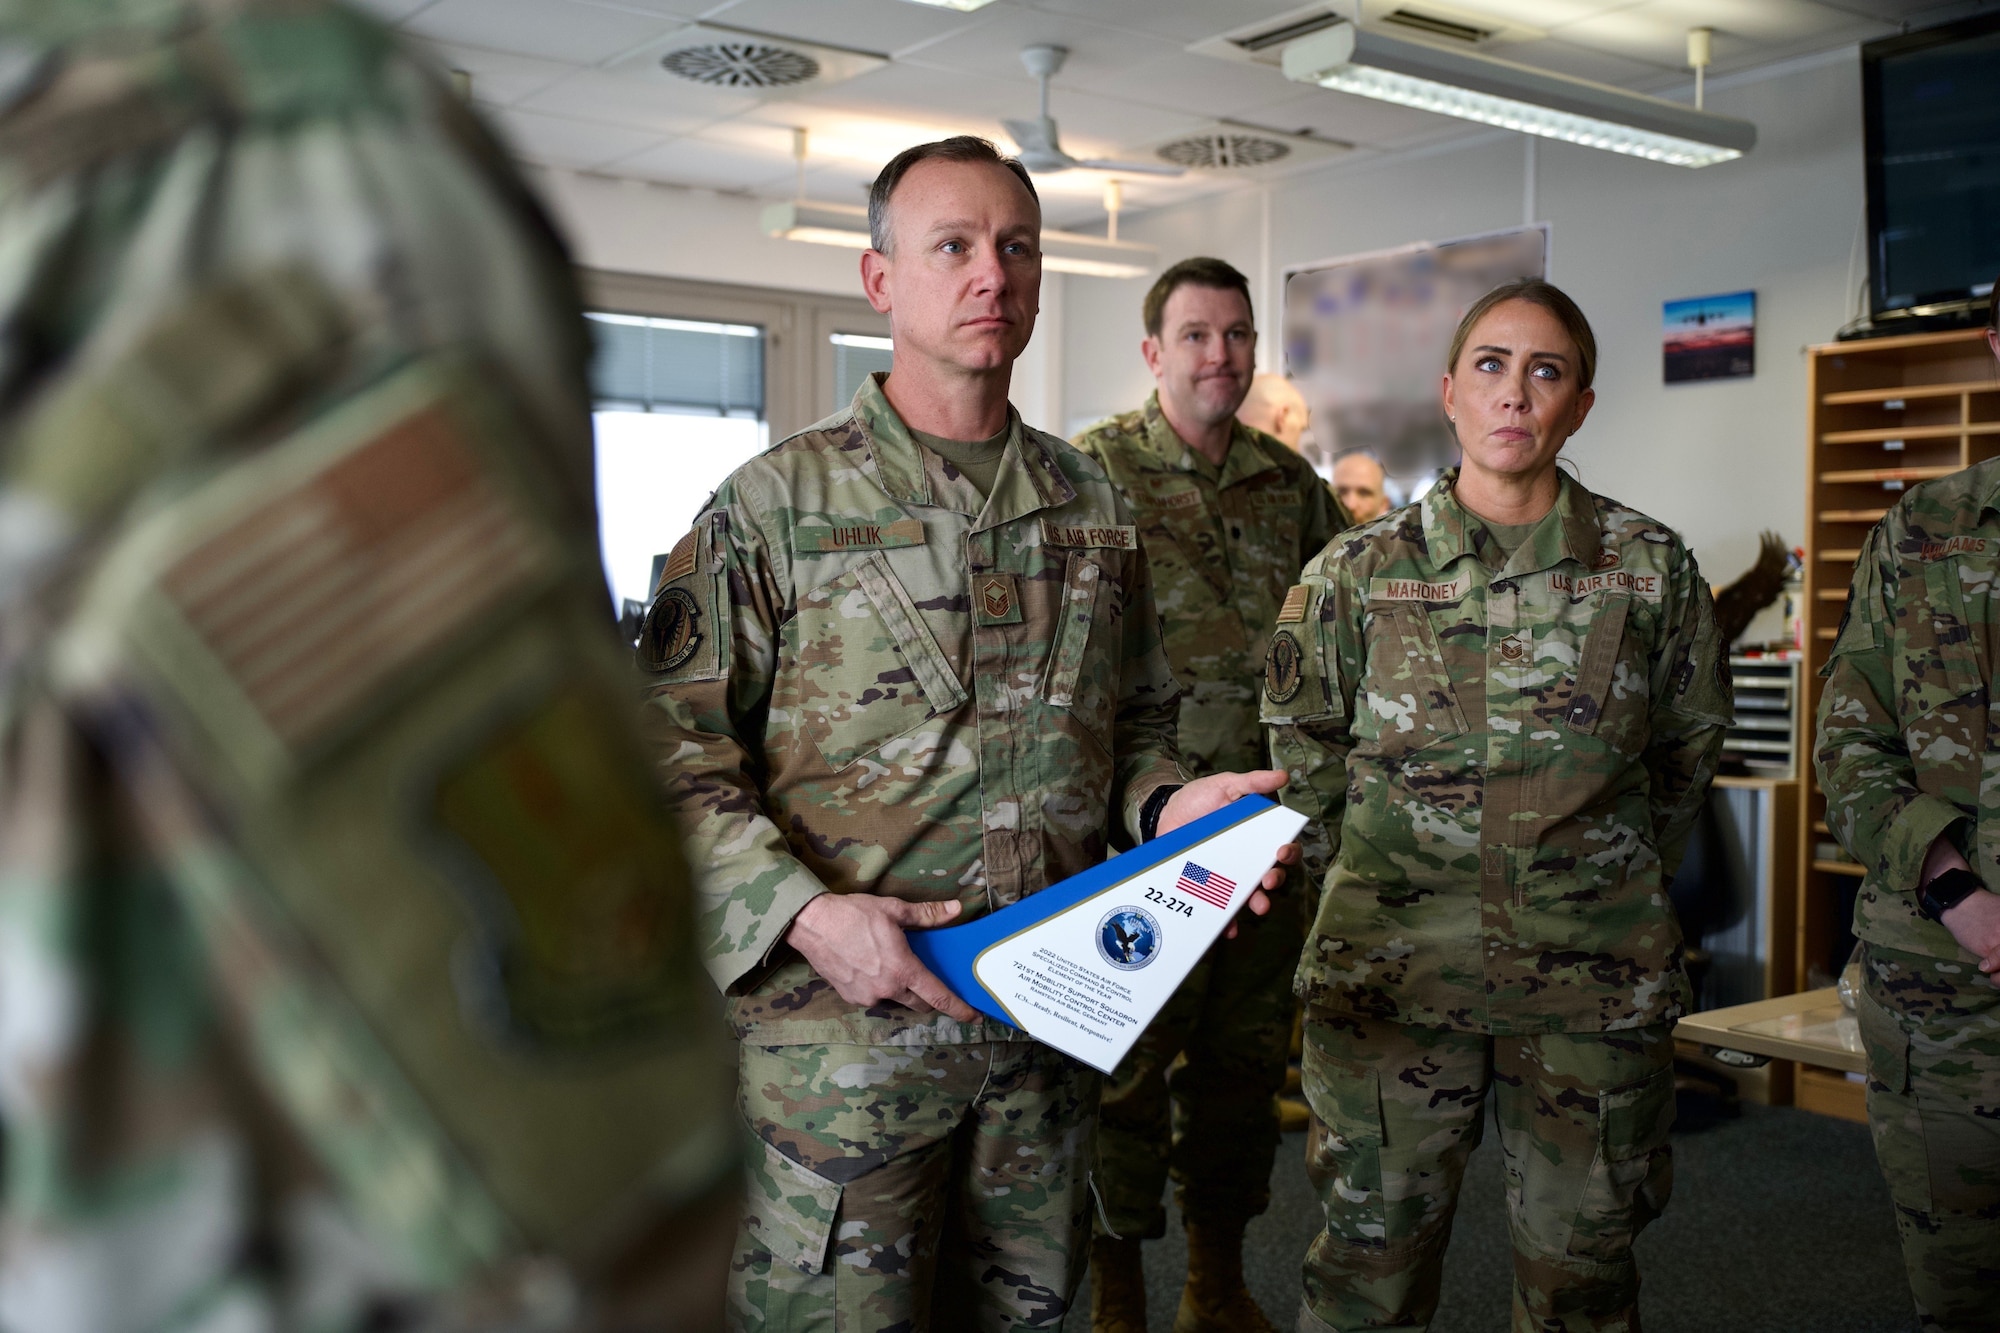 Master Sgt. Anthony Uhlik (left), 721st Mobility Support Squadron command and control operations superintendent, and Master Sgt. Angeline Mahoney (right), 721st Mobility Support Squadron senior enlisted leader, speak with the 521st Air Mobility Operations Wing command team on Ramstein Air Base, Germany, March 20, 2023.